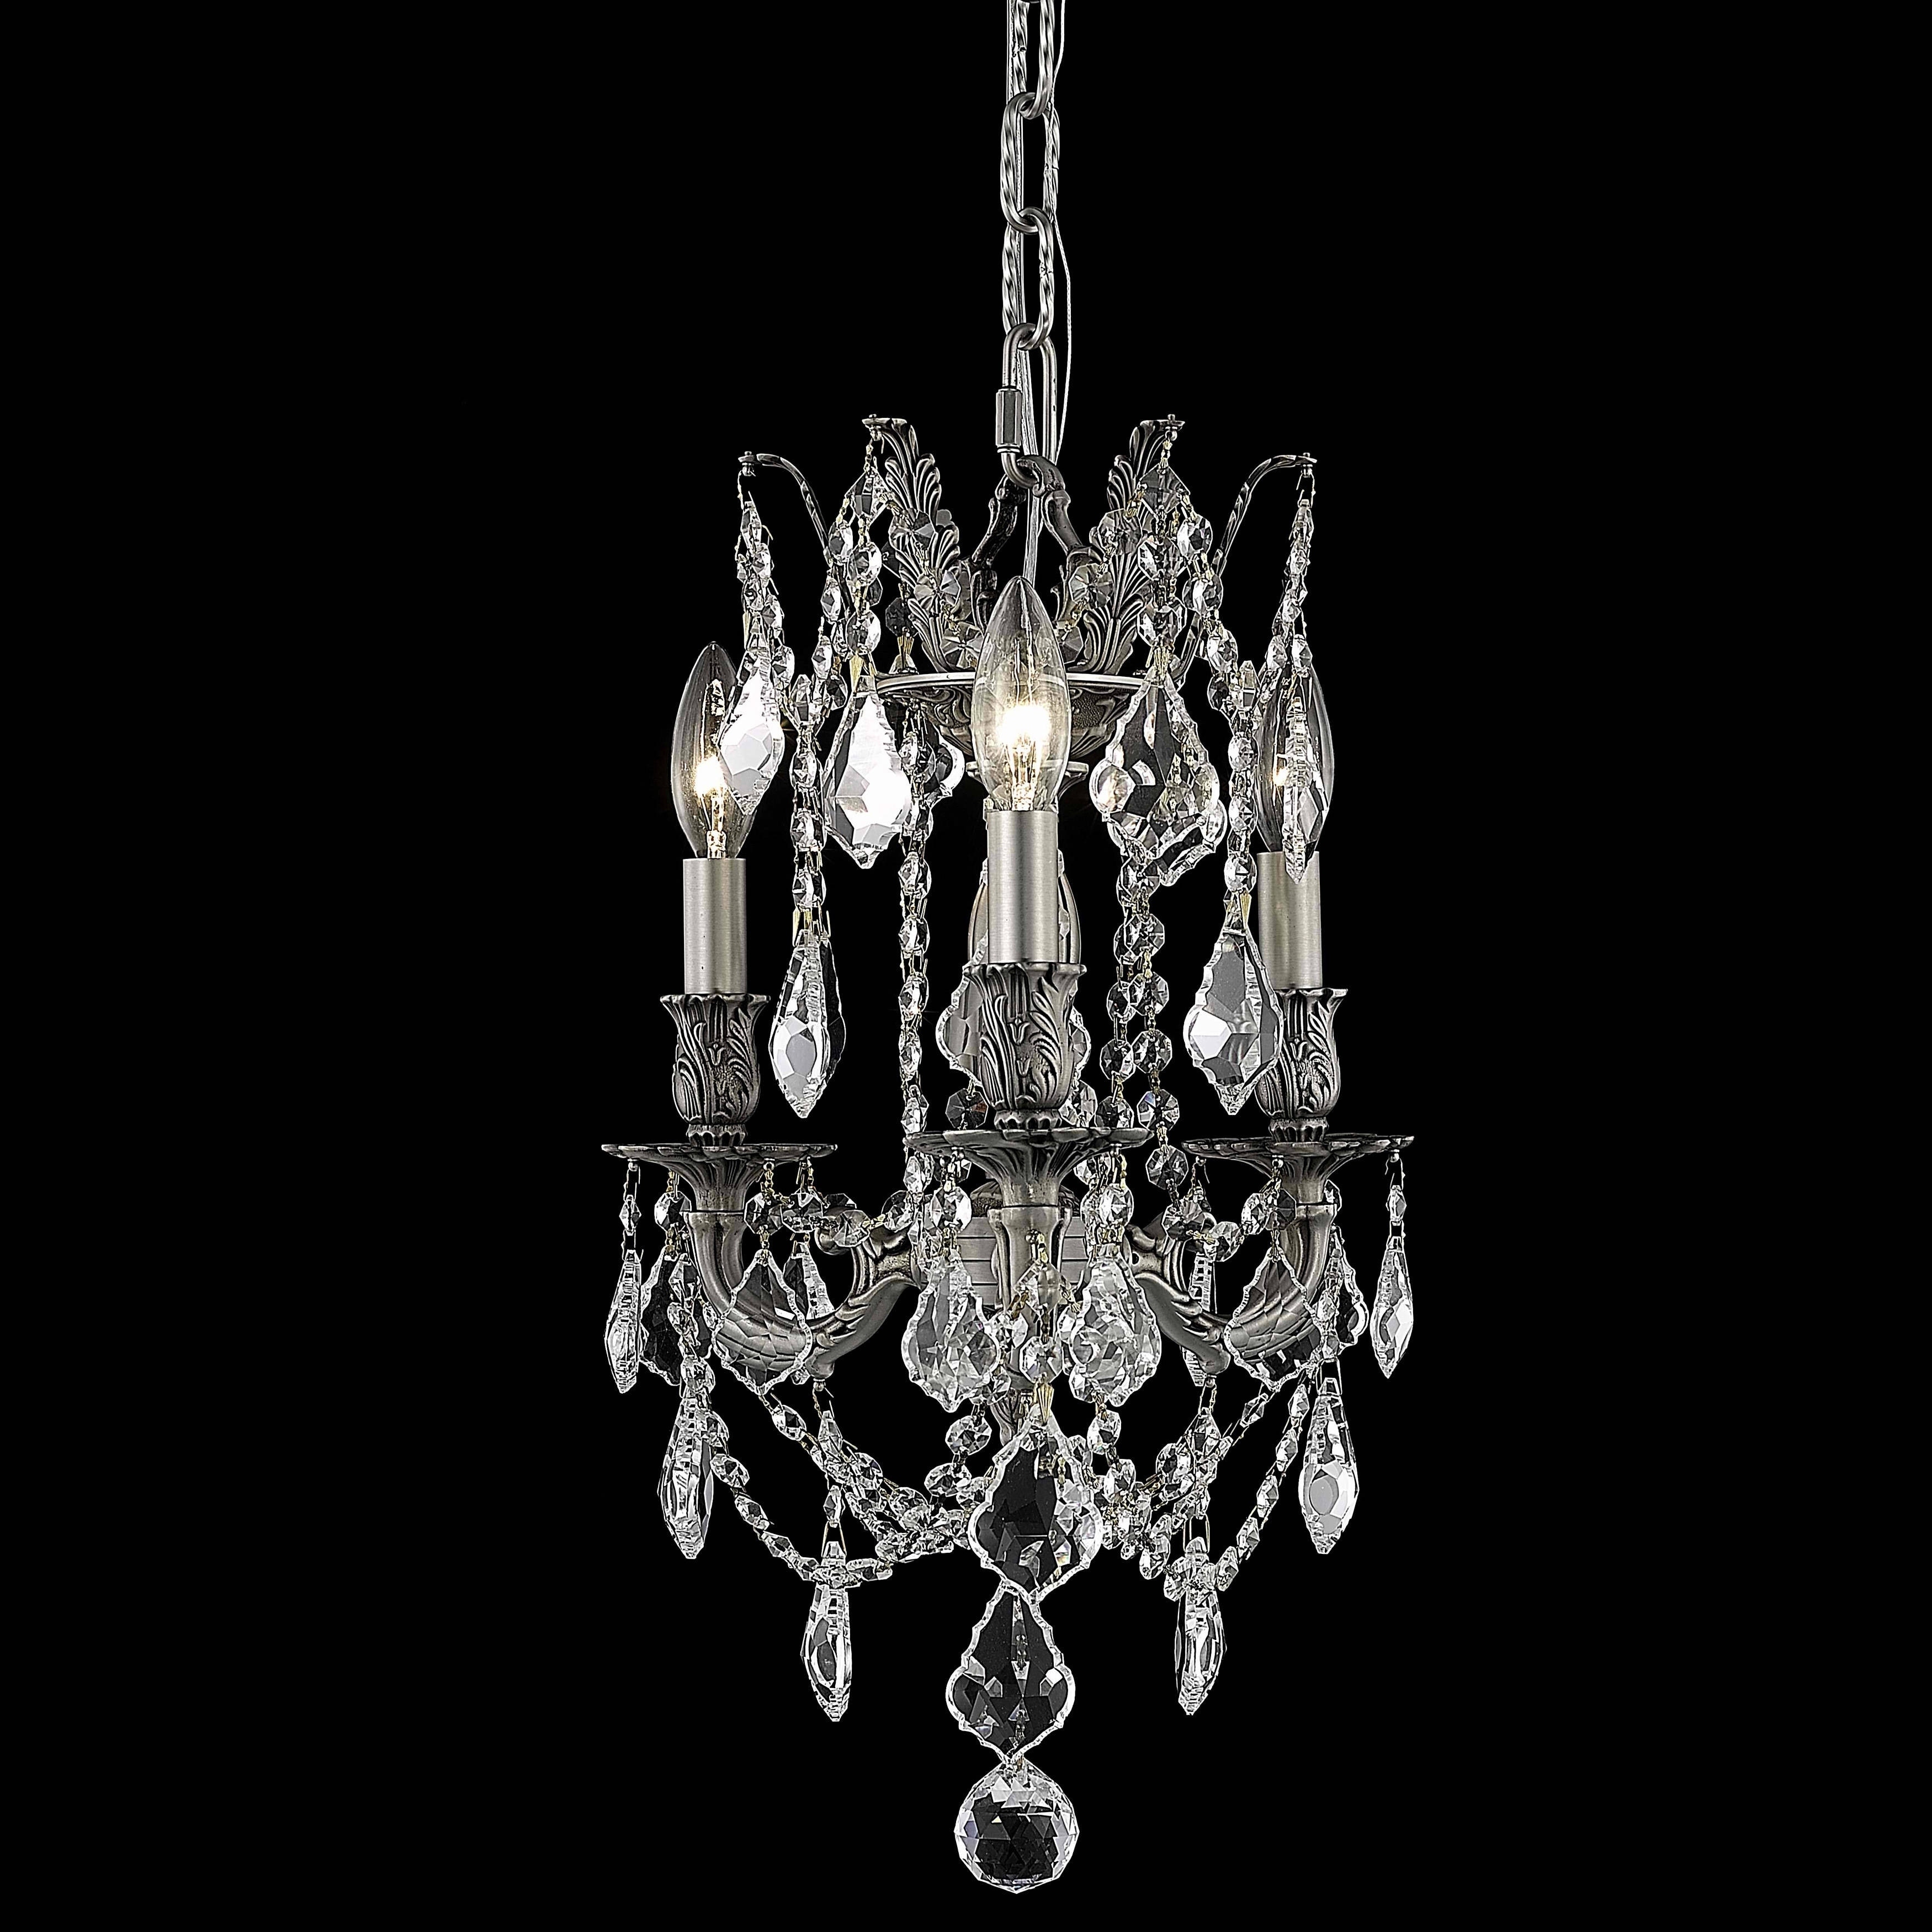 Christopher Knight Home Lugano 3 light Royal Cut Crystal And Pewter Chandelier